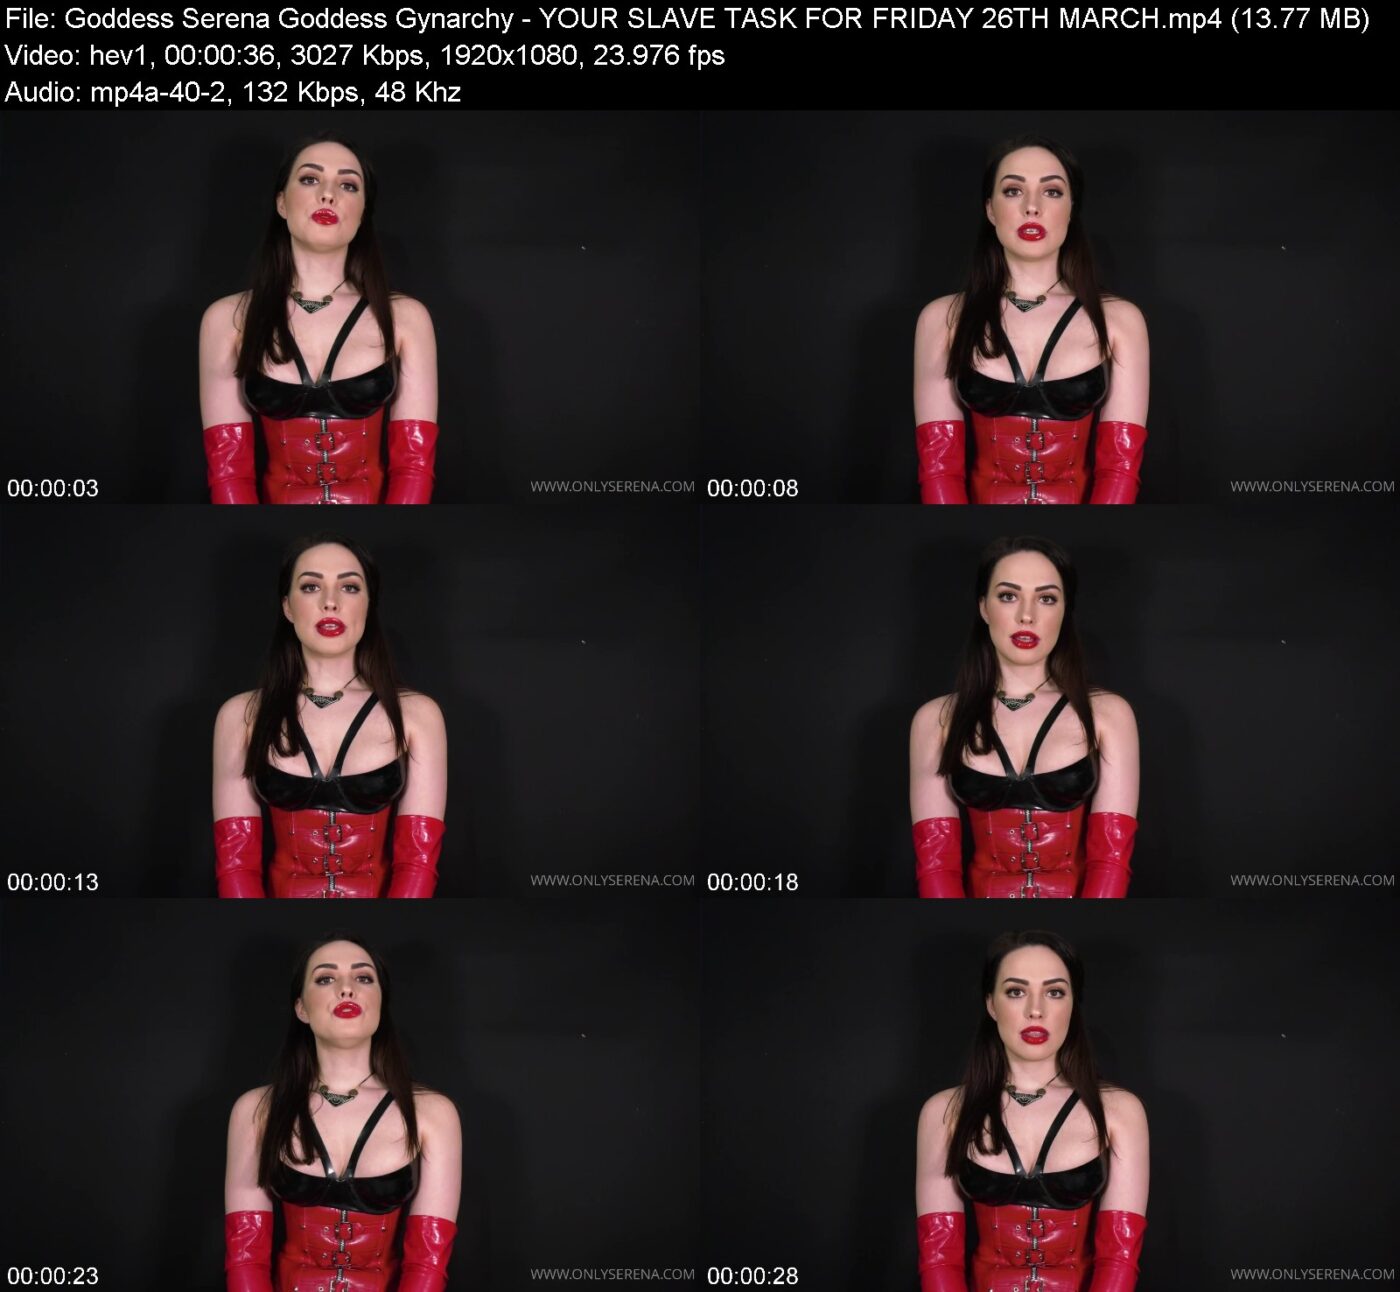 Actress: Goddess Serena Goddess Gynarchy. Title and Studio: YOUR SLAVE TASK FOR FRIDAY 26TH MARCH